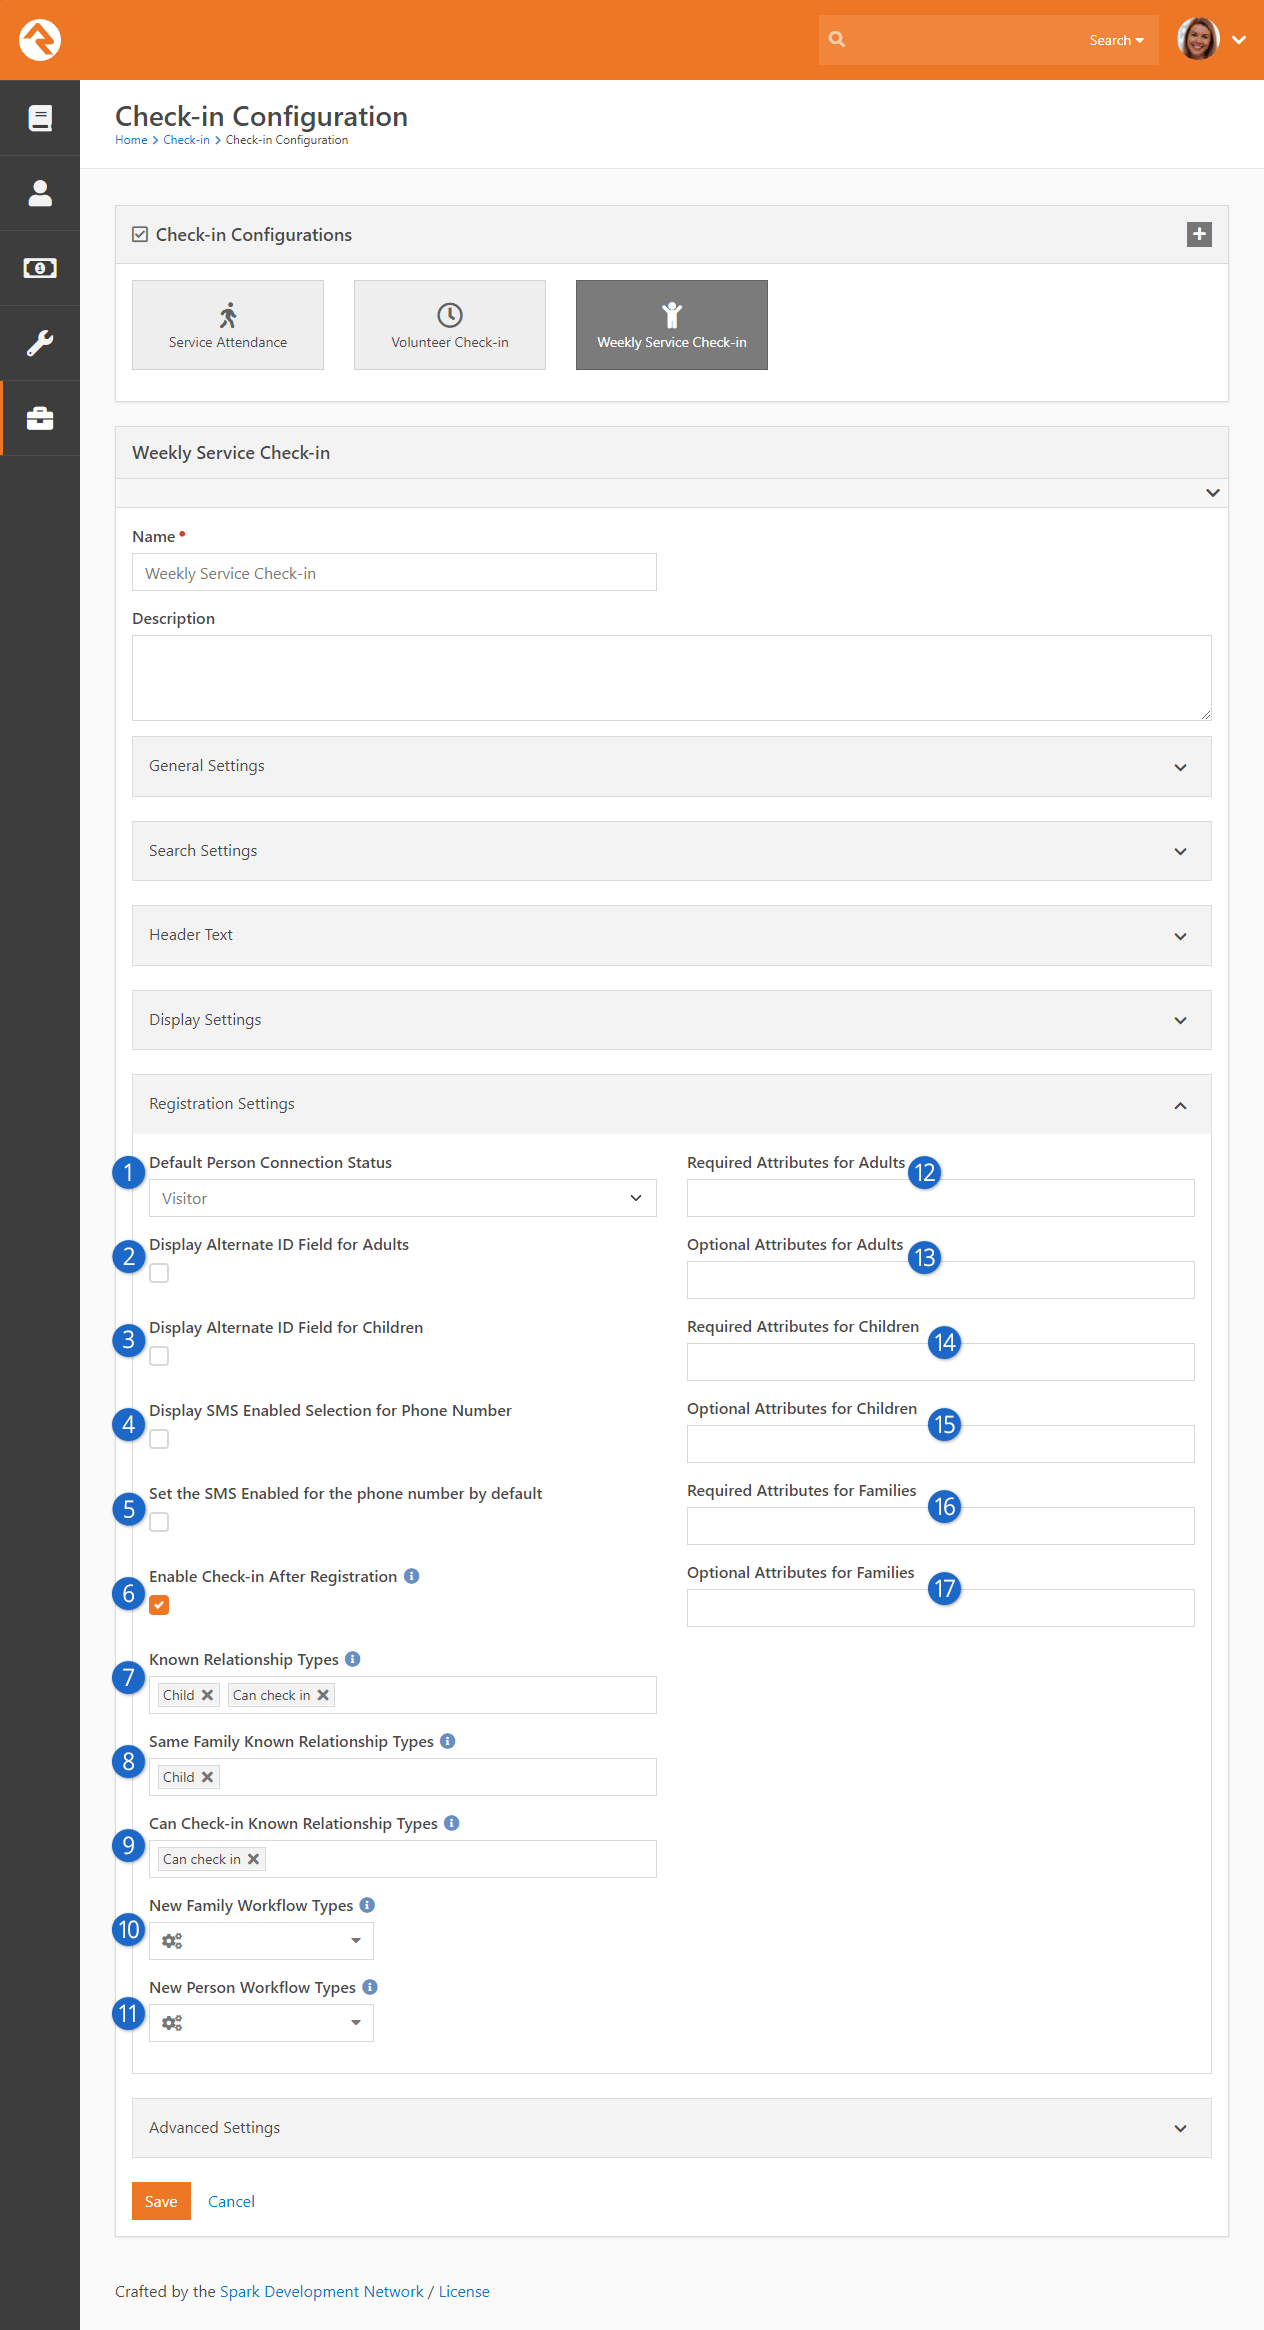 Check-in Registration Settings